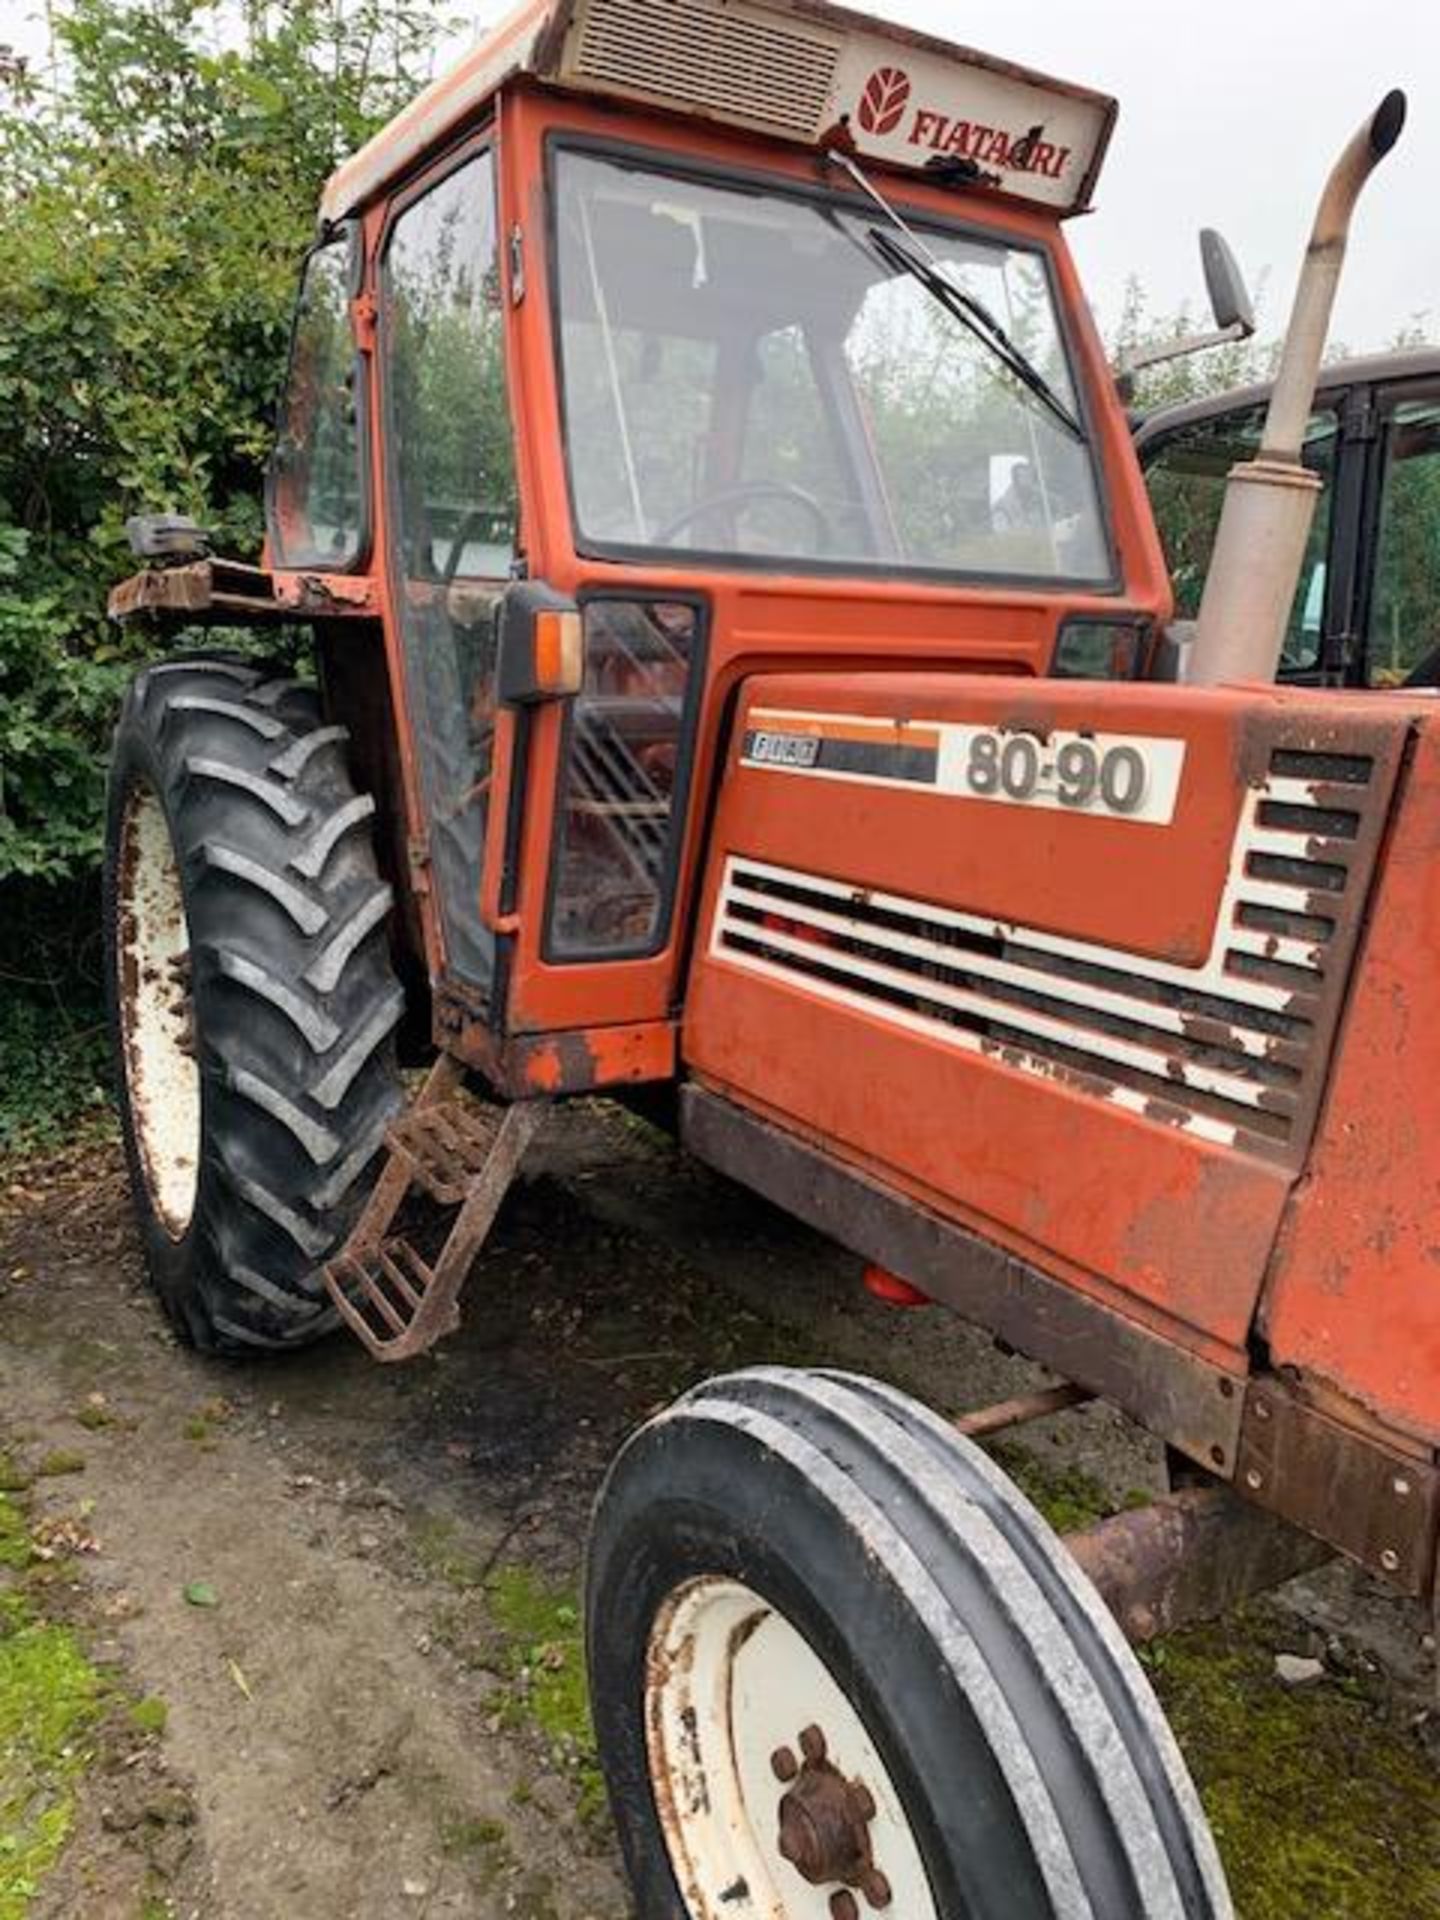 FIAT 80 90 , 1986,2WD, HOURS A VERY AS TRACTOR IS IN DAILY USE - Bild 2 aus 11